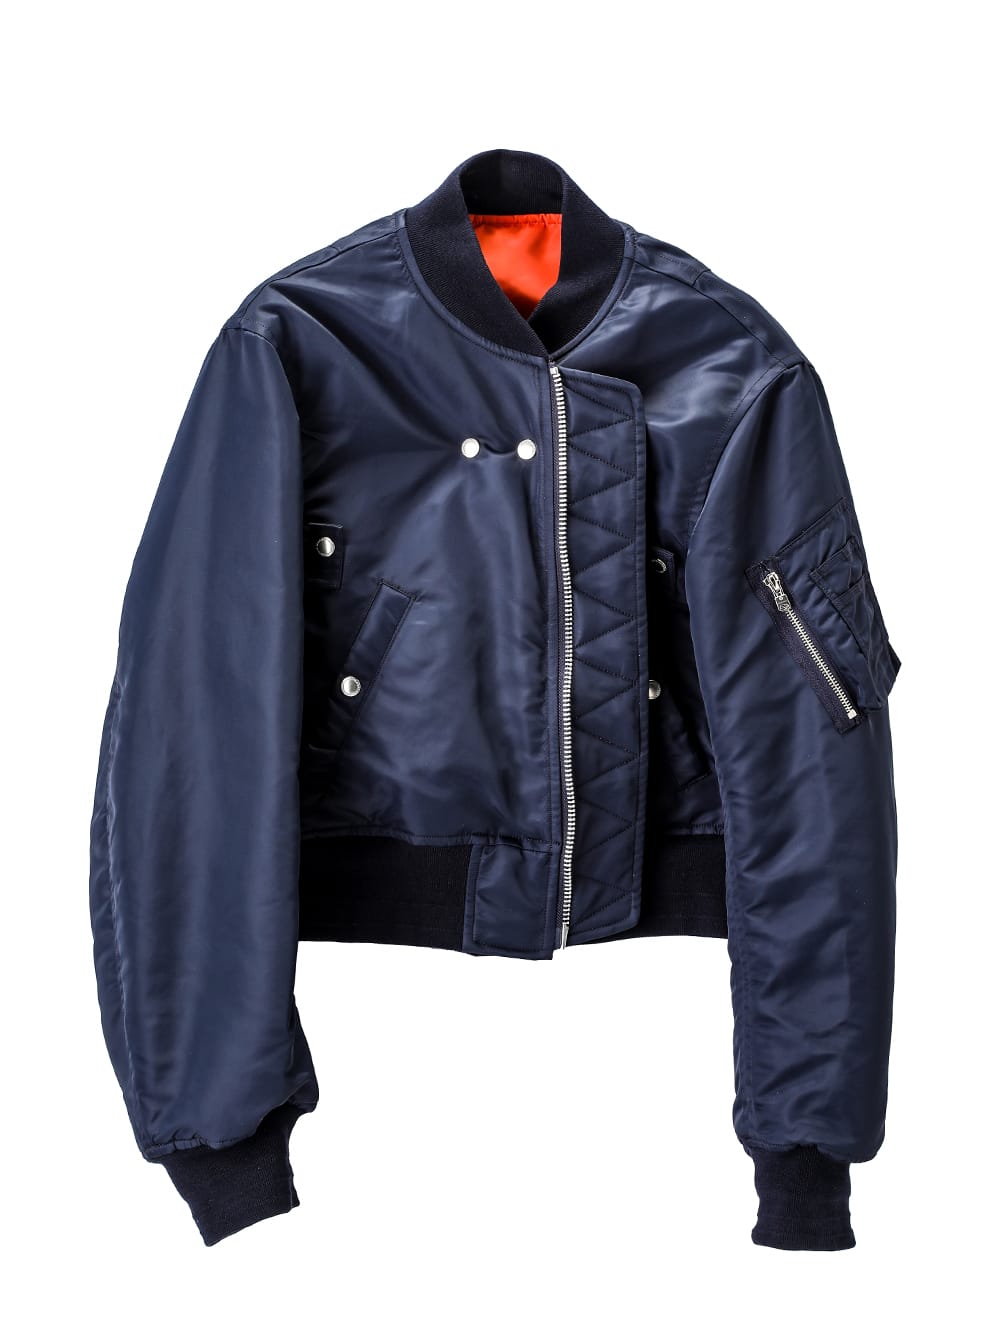 sj.0018bAW23-midnight two-way cropped bomber jacket. THE TWO OF US ...